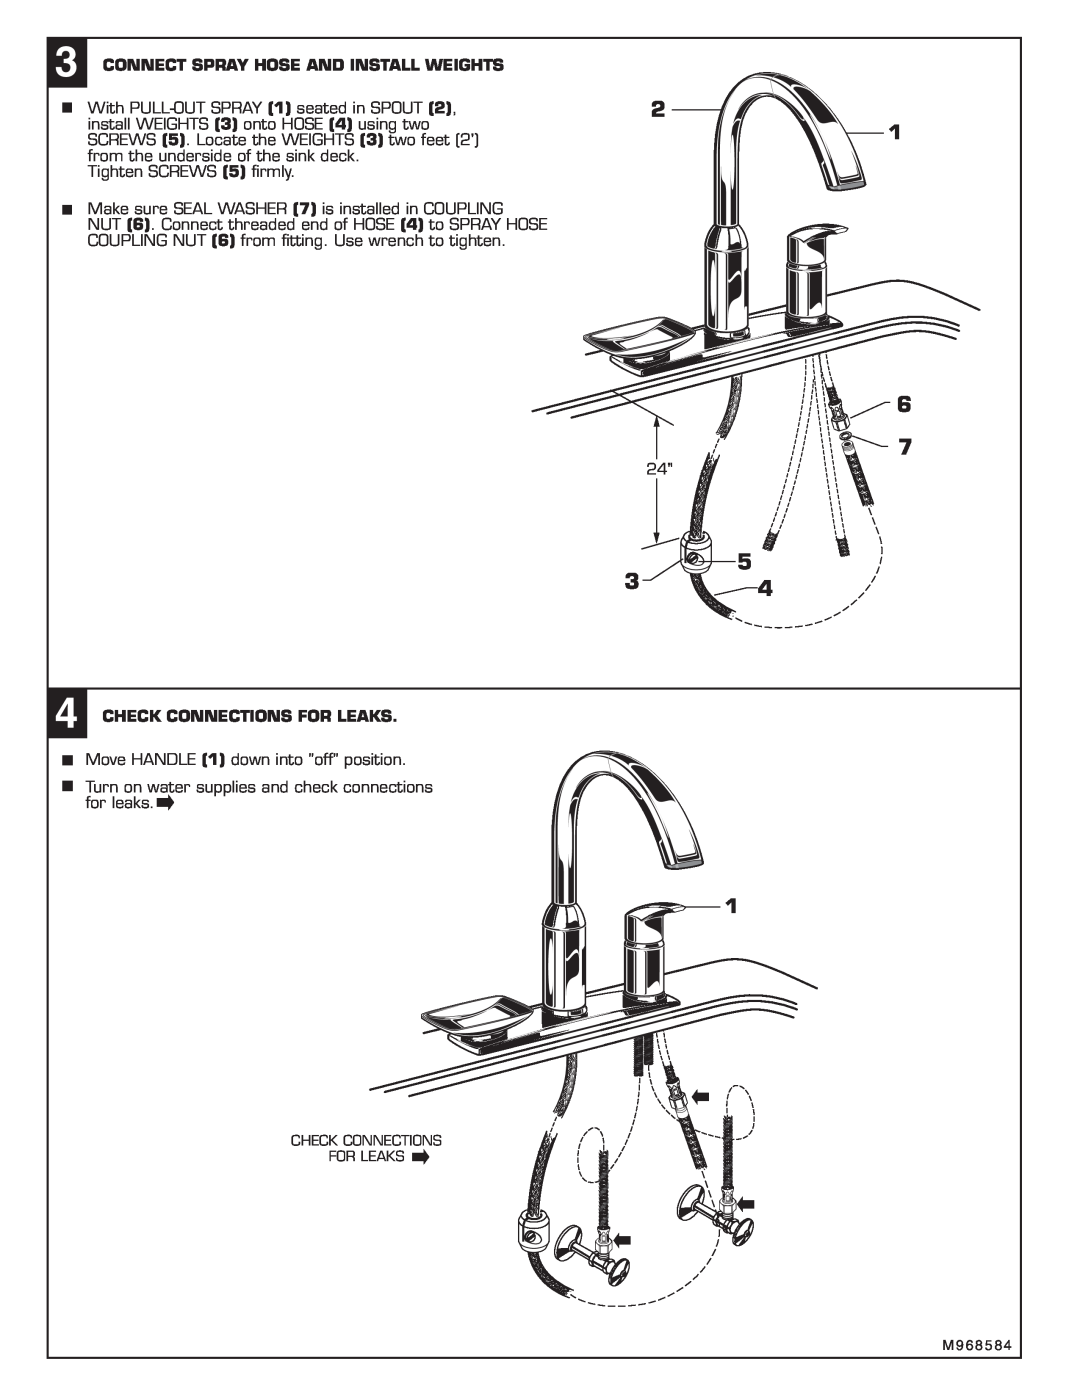 American Standard 4101.115 installation instructions Connect Spray Hose And Install Weights, Check Connections For Leaks 